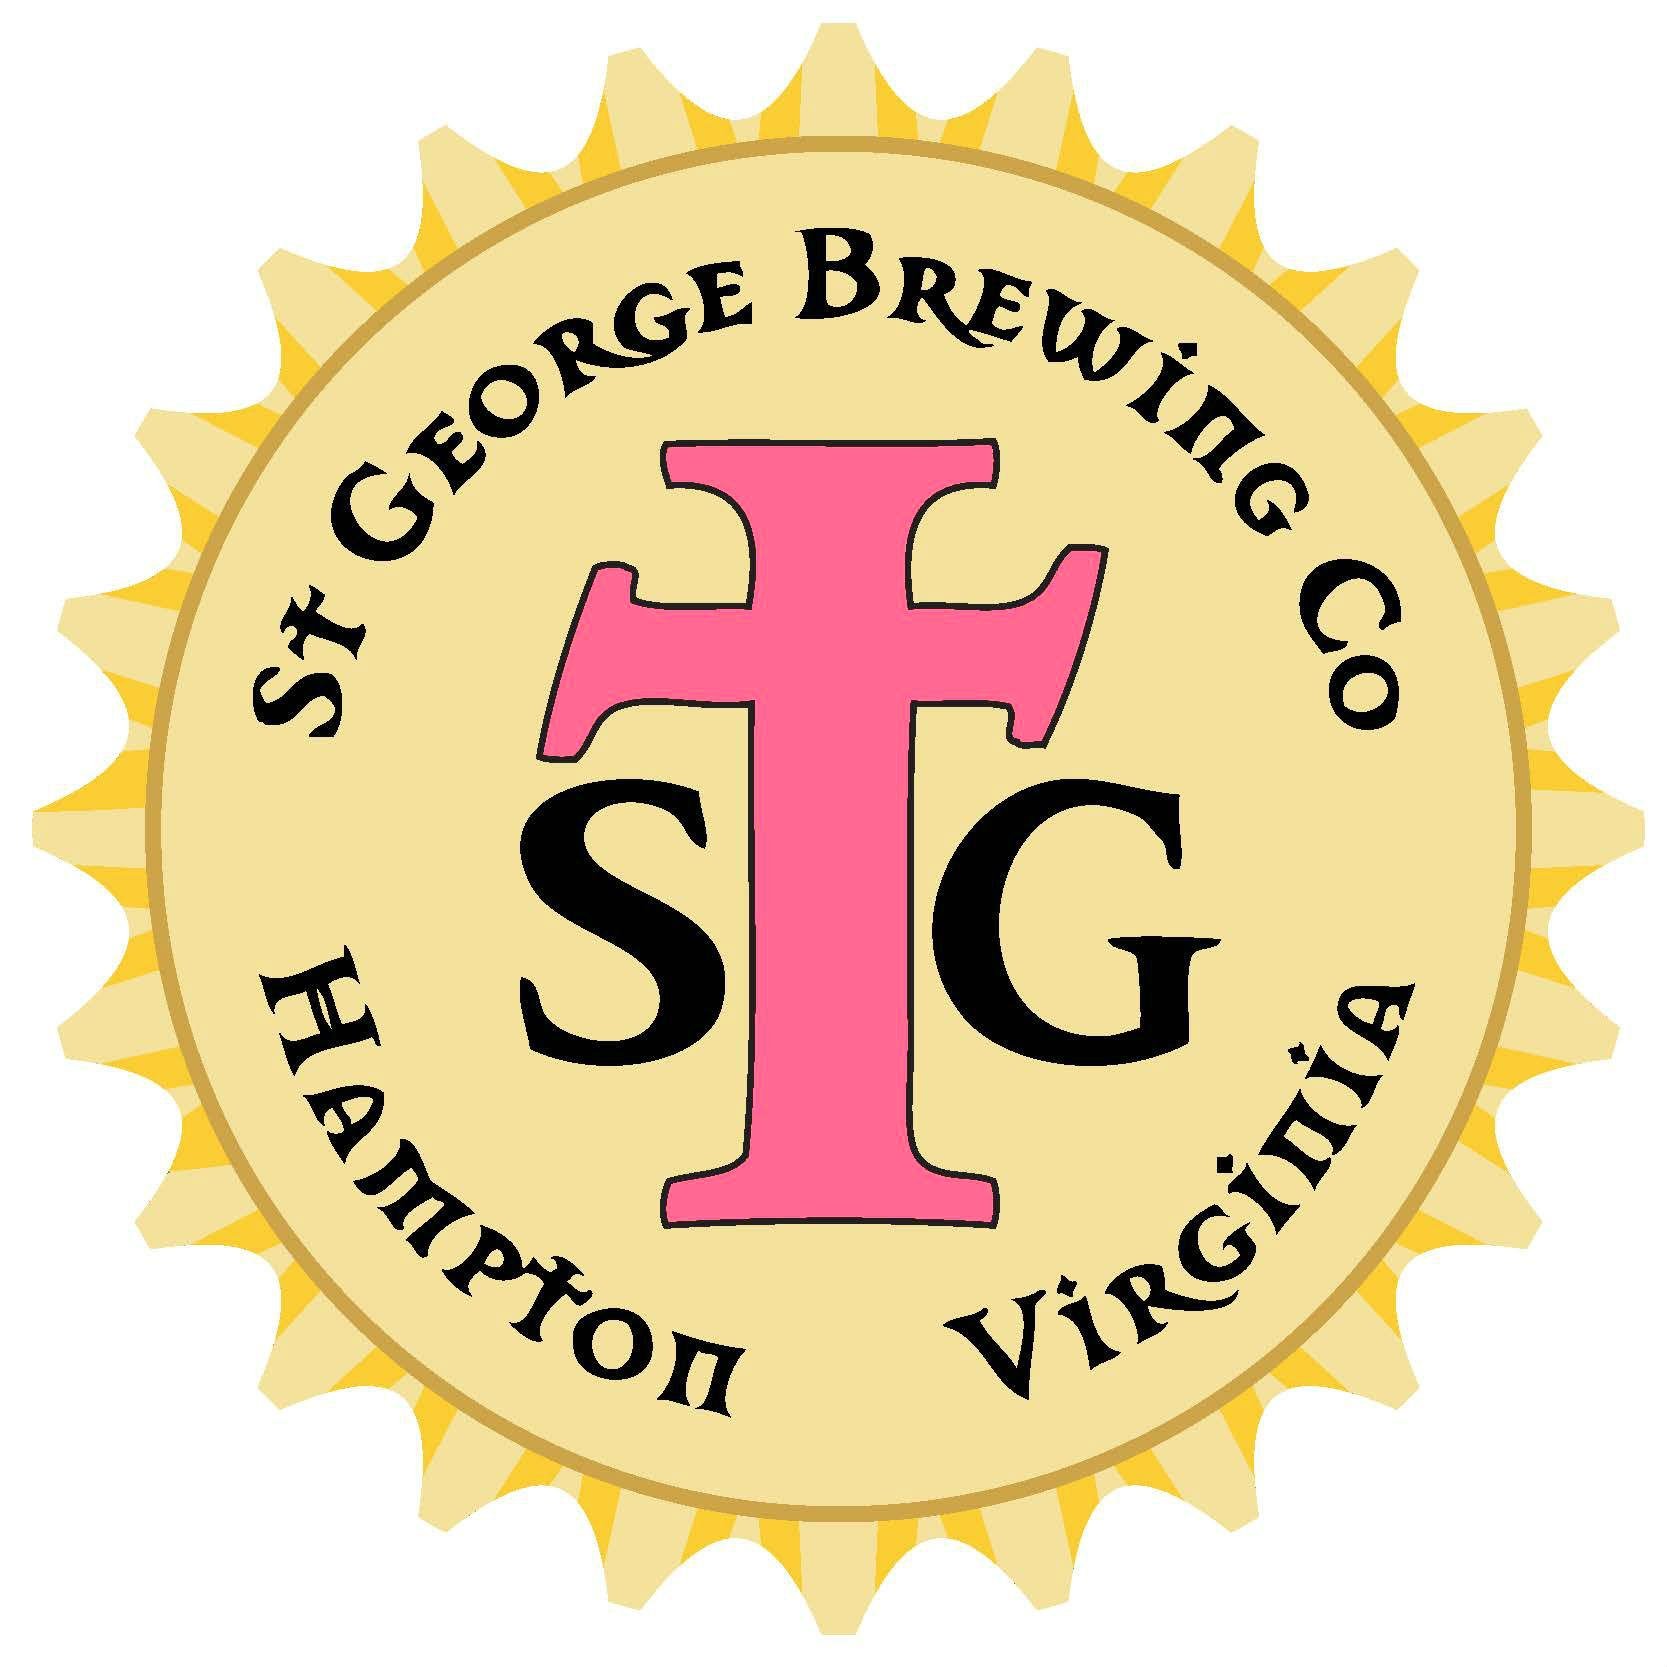 We are a craft brewery located in Hampton, VA who brews traditional German and English style beers for almost 20 yrs now!